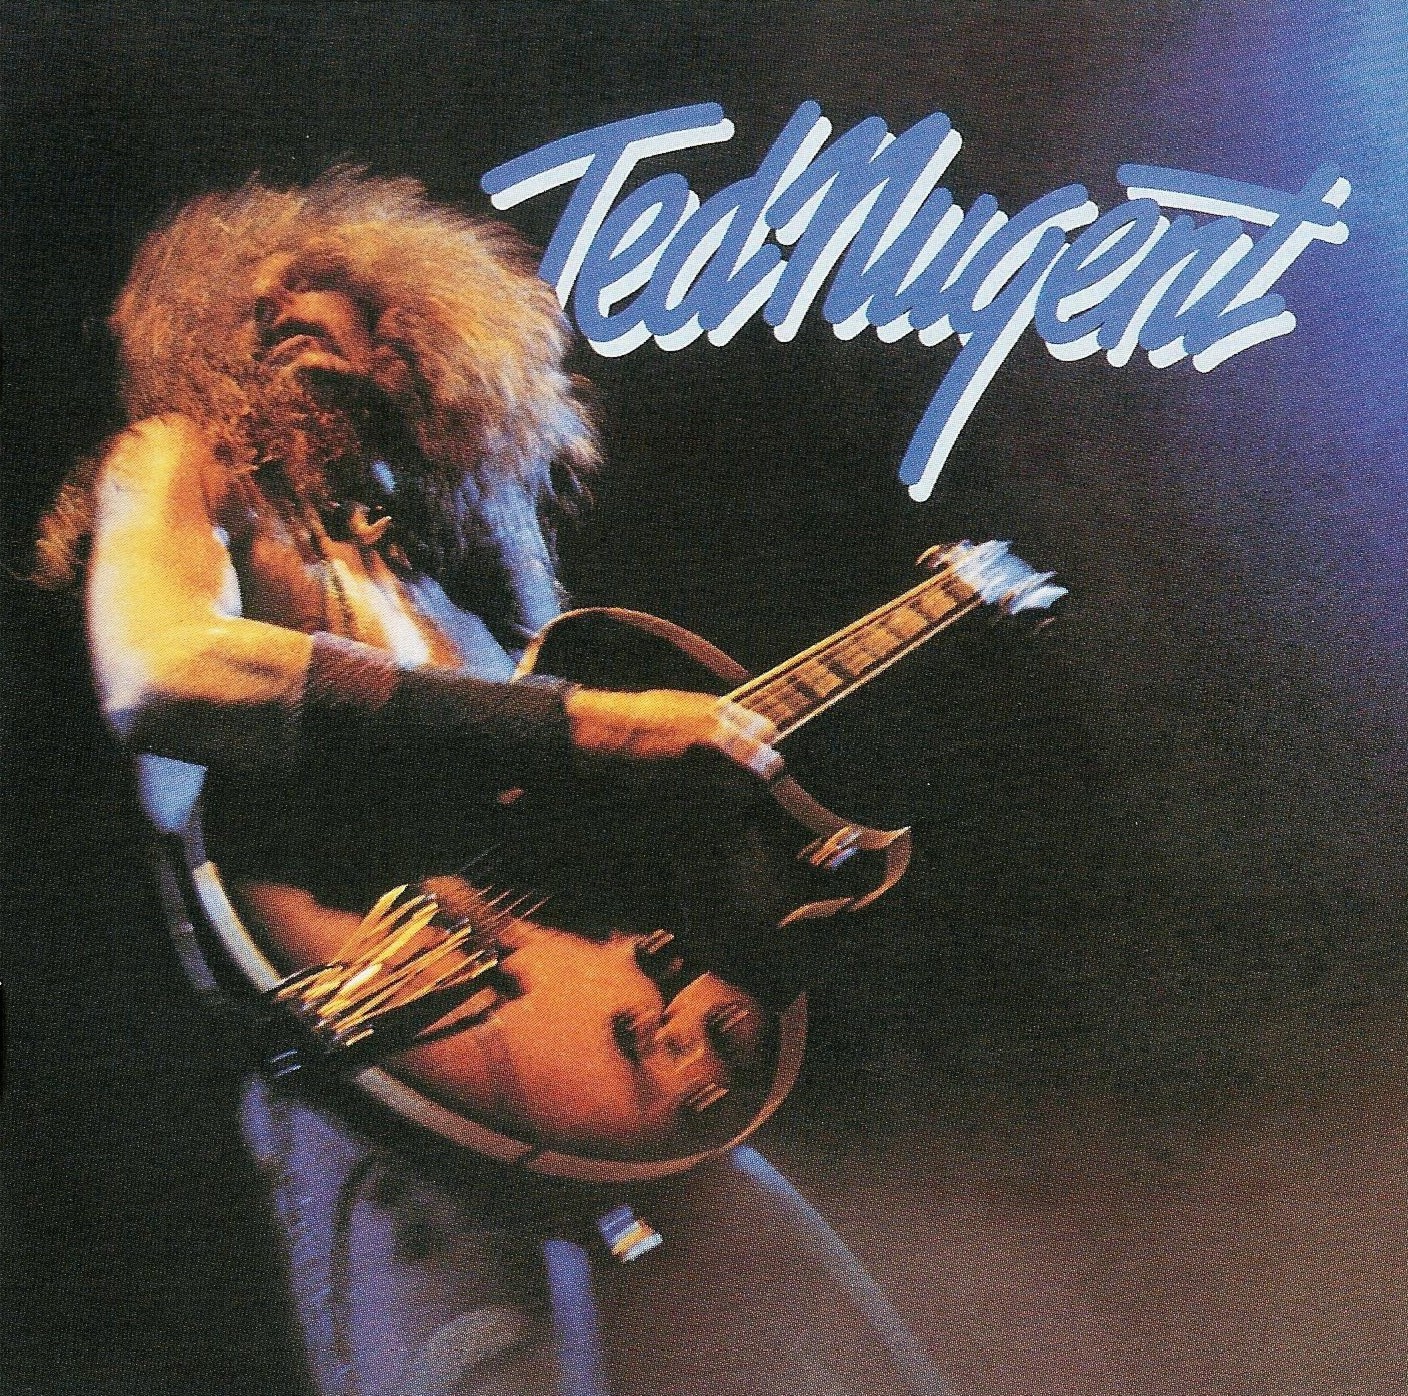 Ted Nugent - Ted Nugent 1975 remastered